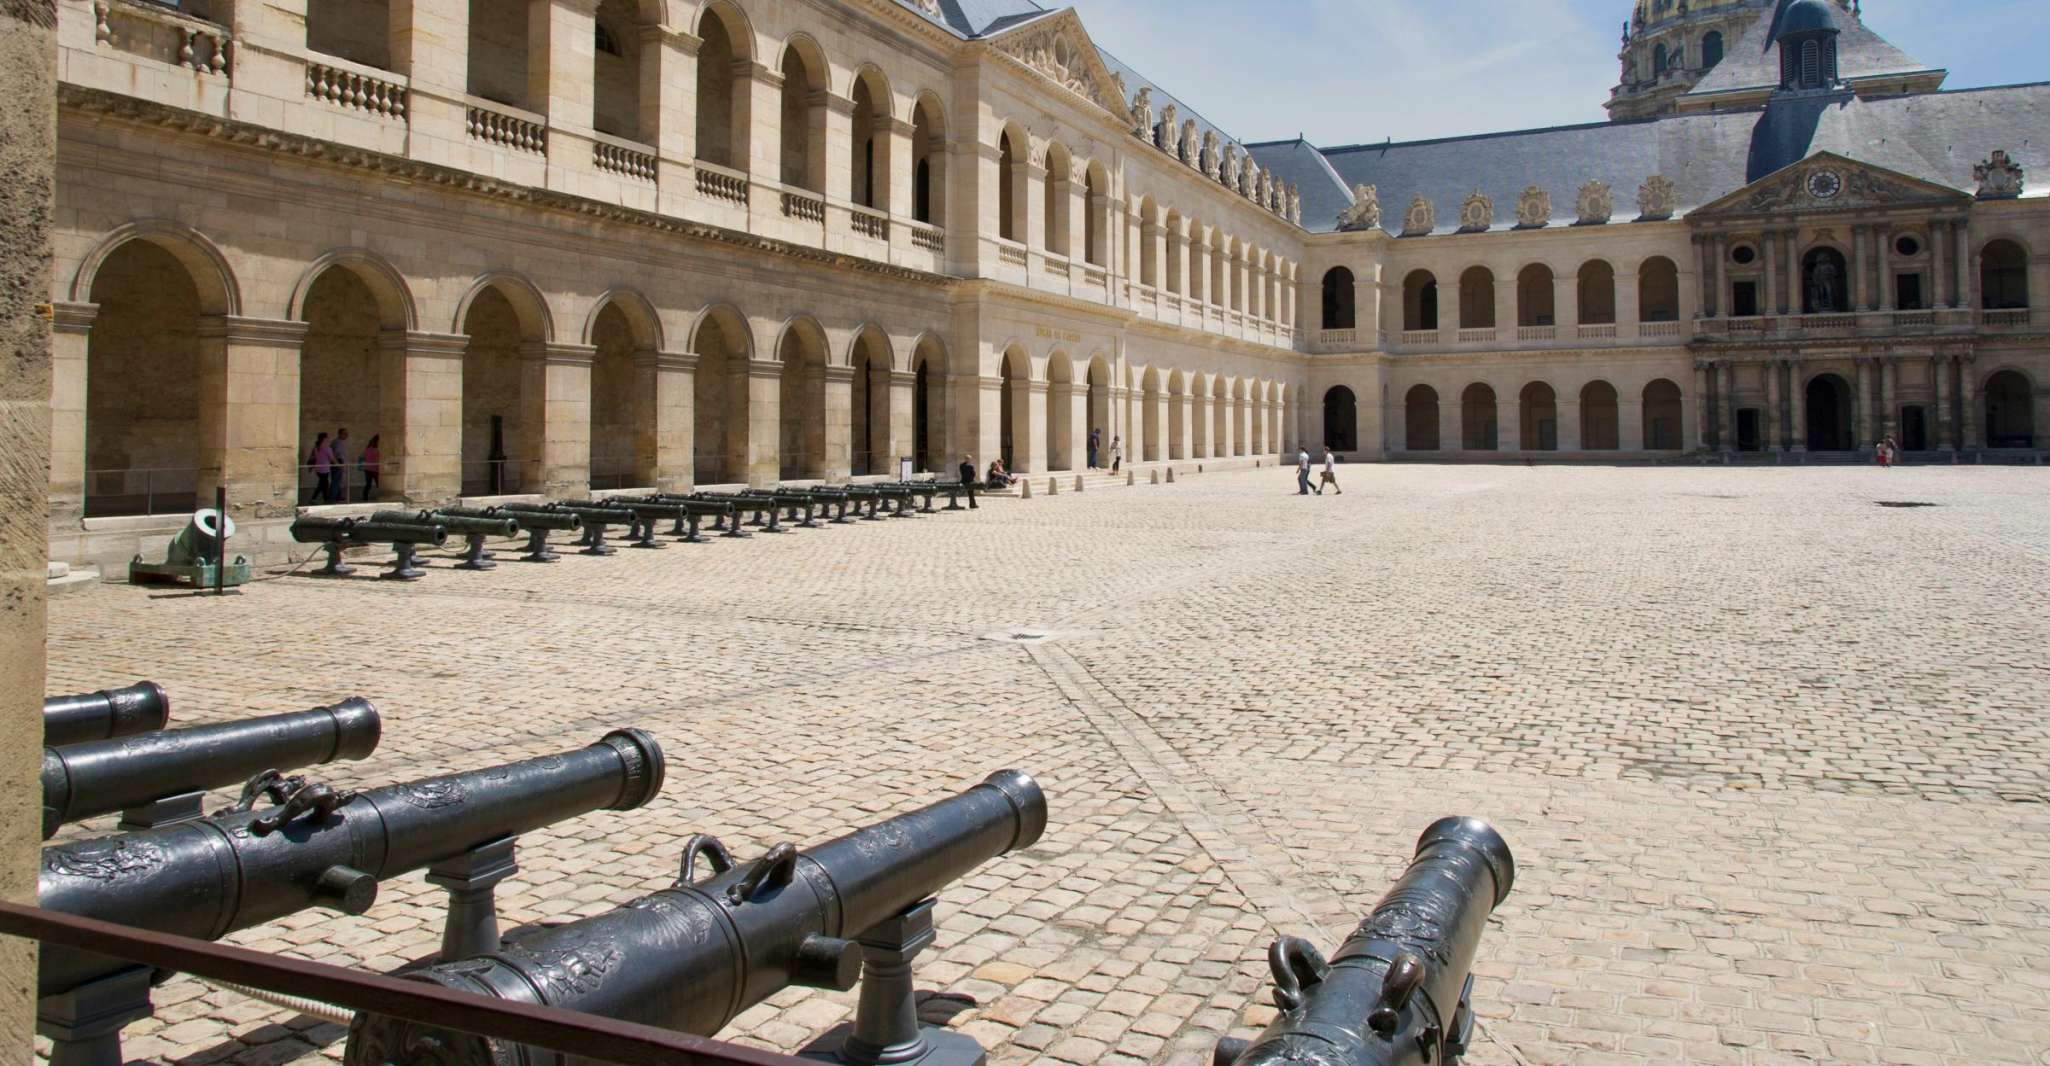 Les Invalides, Napoleon's Tomb & Army Museum Entry - Housity